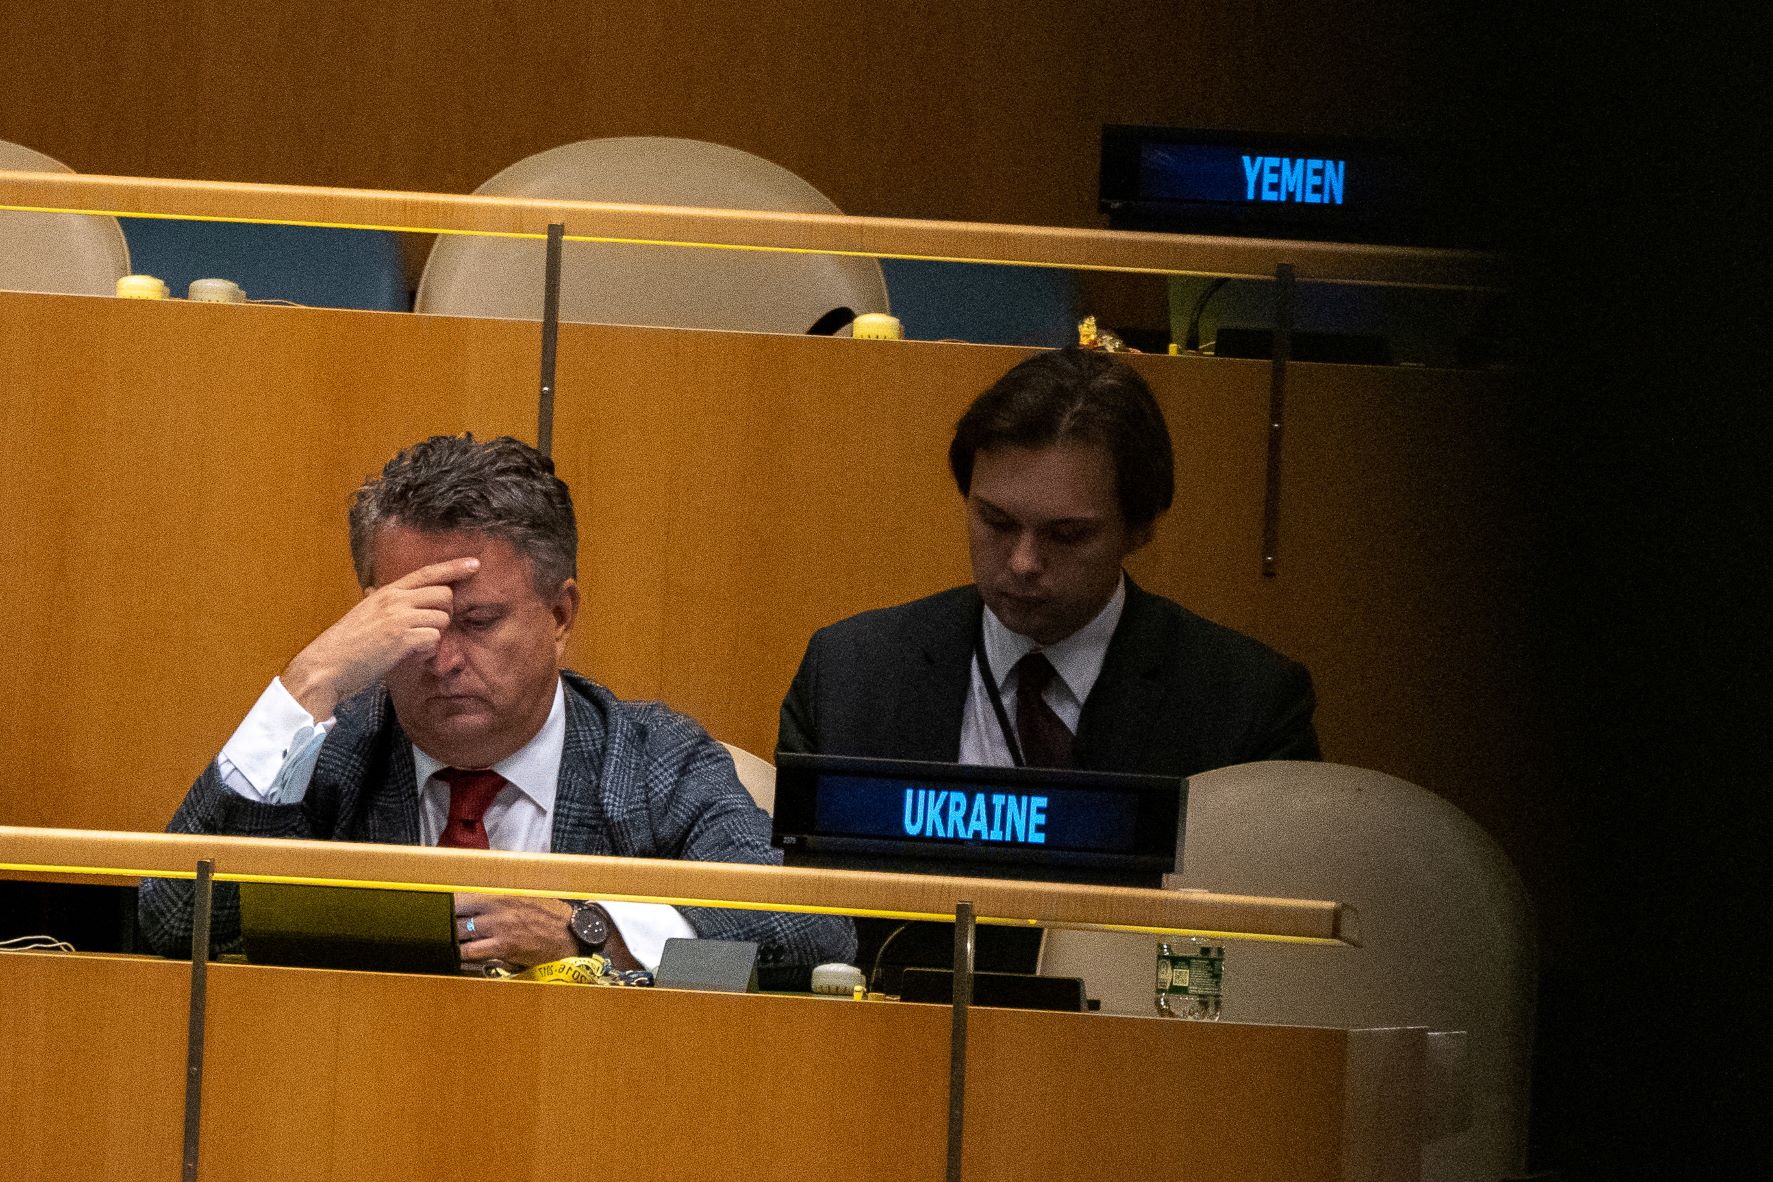 Ukraine's Ambassador to the United Nations Sergiy Kyslytsya sits with his hand on his head gazing downward at the UN General Assembly during the Nuclear Non-Proliferation Treaty review conference in New York City on August 1, 2022